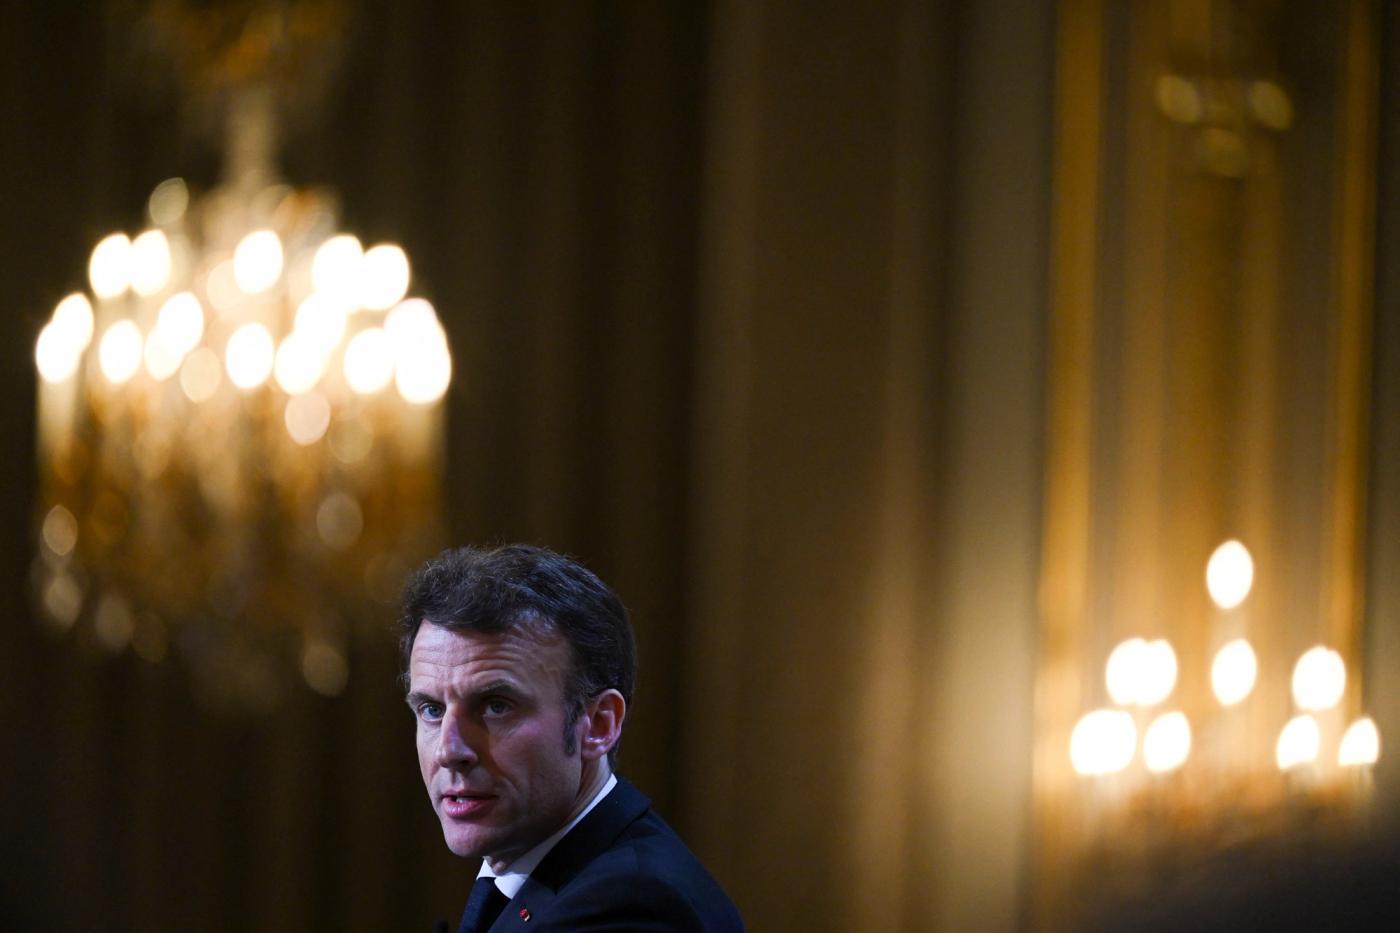 French President Emmanuel Macron gives a speech to ouline France's revamped strategy for Africa ahead of his visit in Central Africa, at the Elysee Palace in Paris on February 27, 2023. Stefano Rellandini/Pool via REUTERS